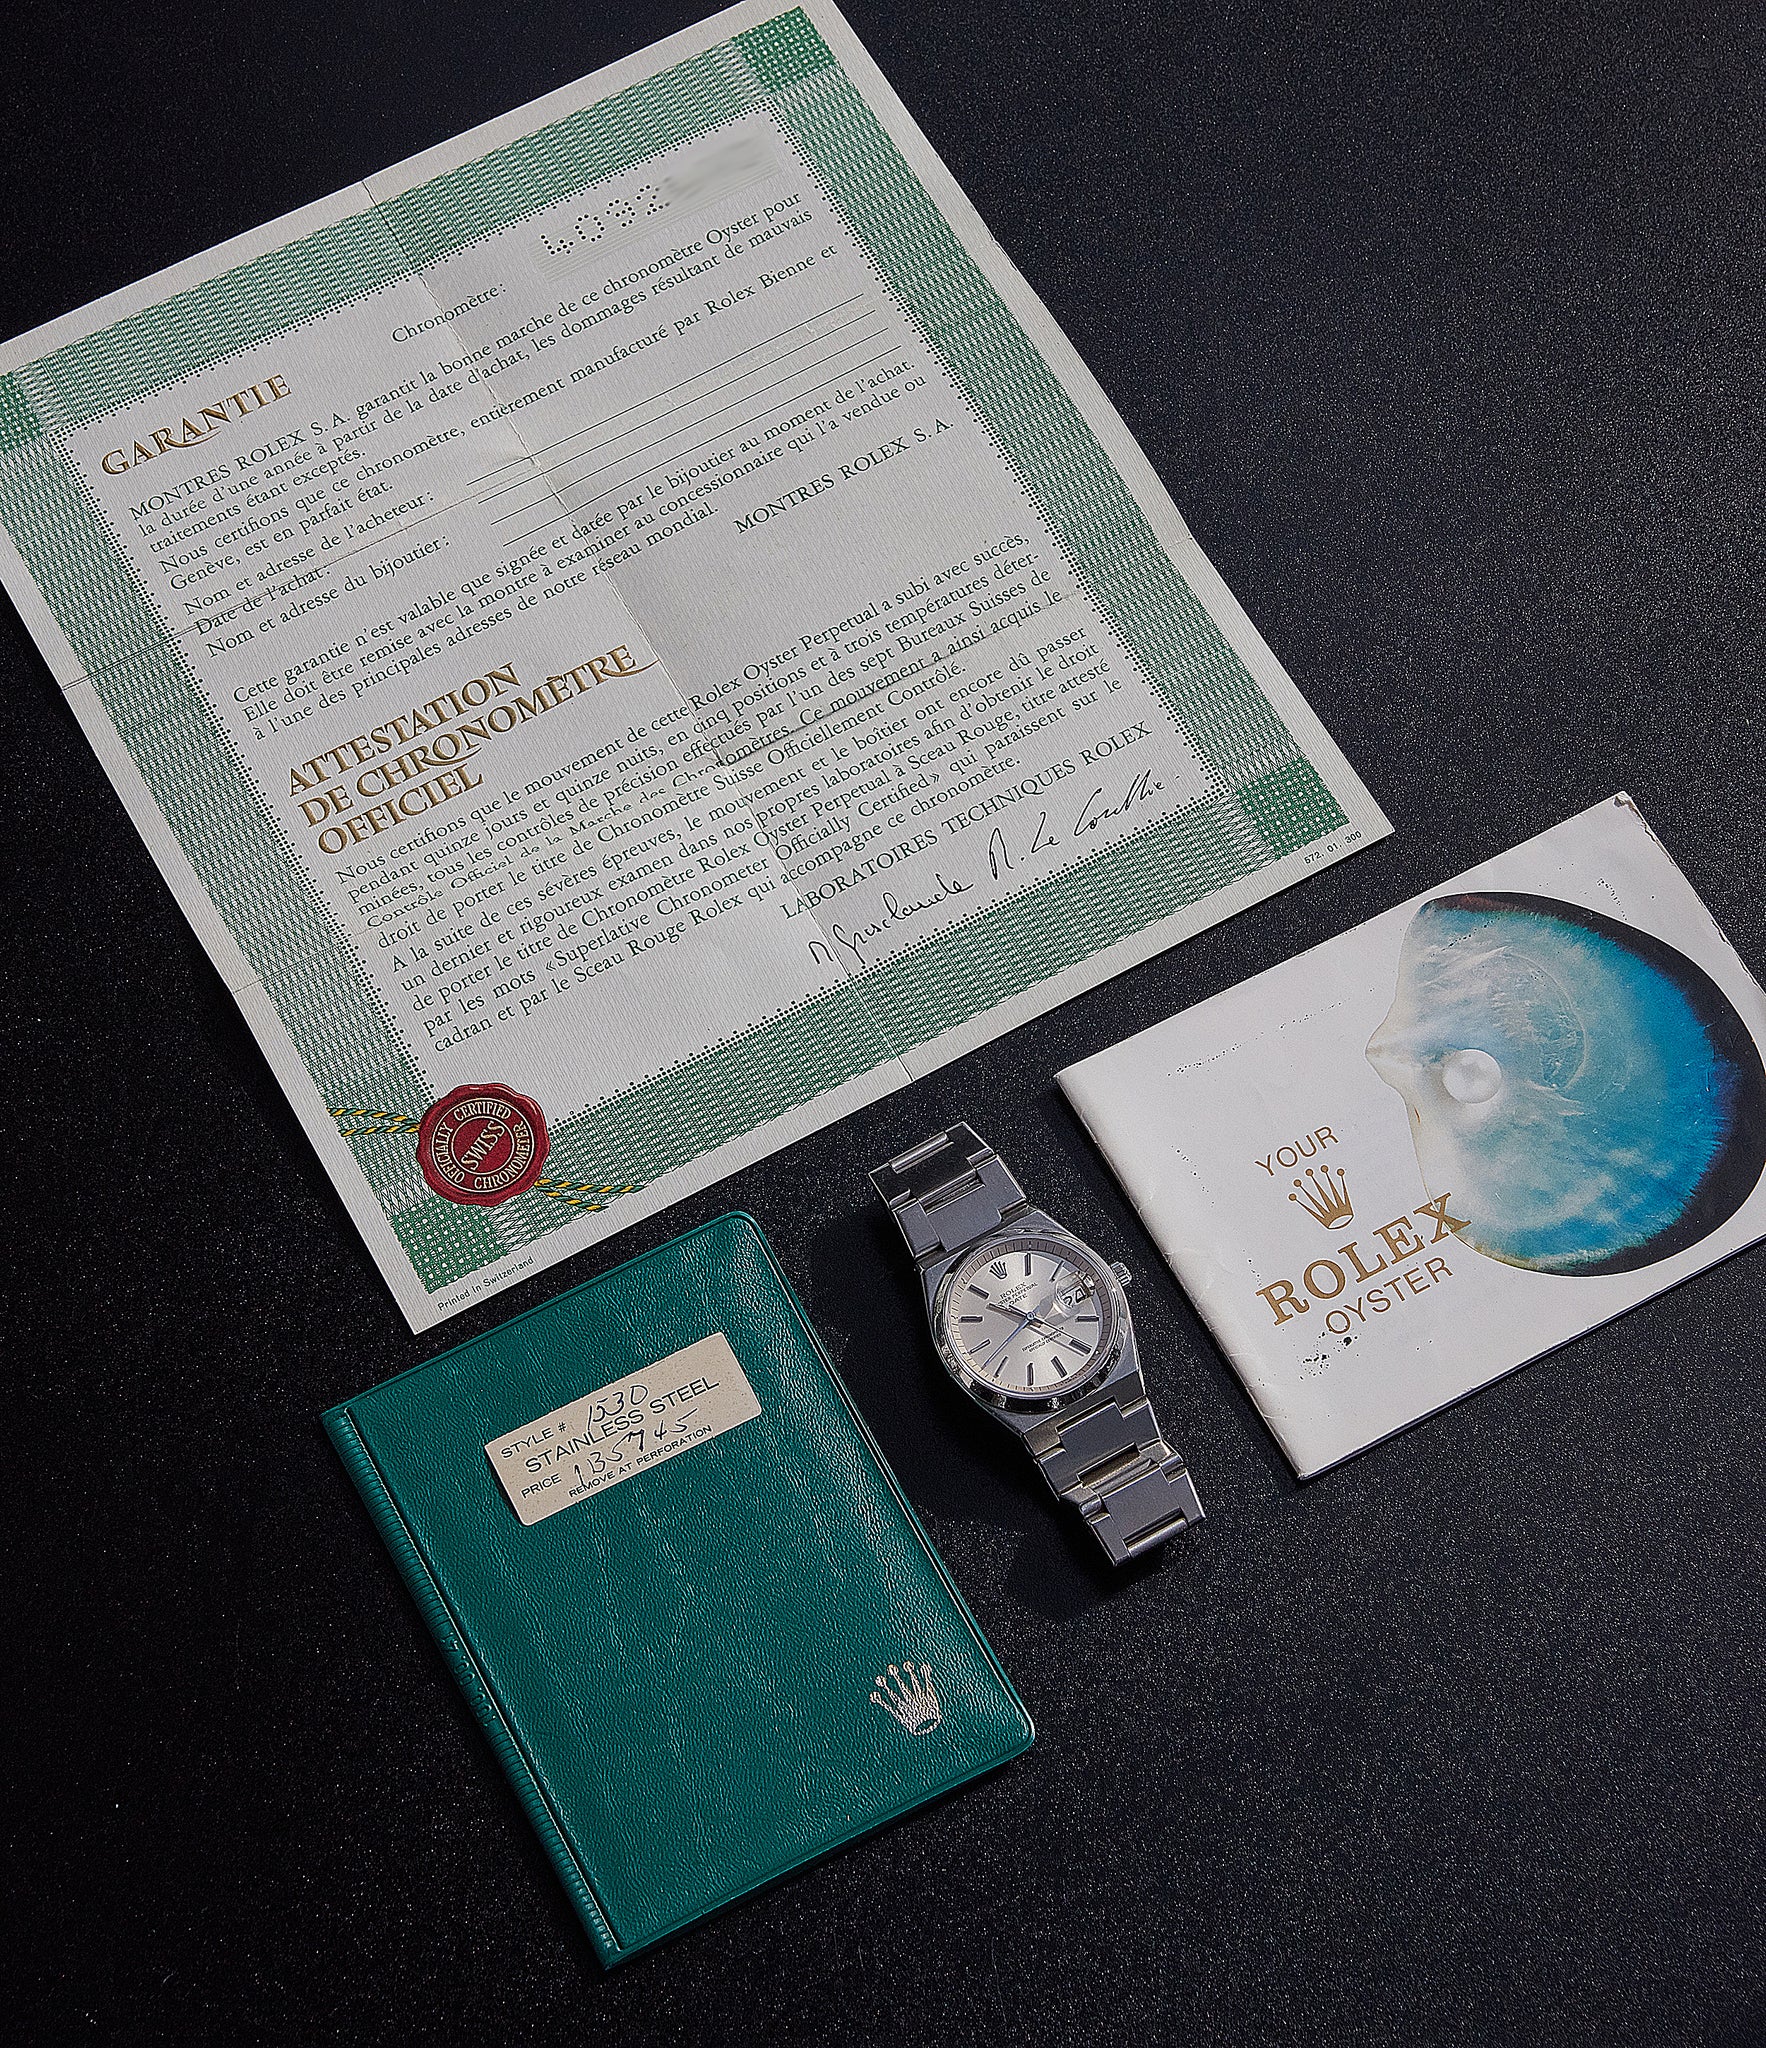 full set vintage Rolex Oyster Perpetual 1530 steel sport watch with papers for sale online at A Collected Man London UK specialist of rare watches